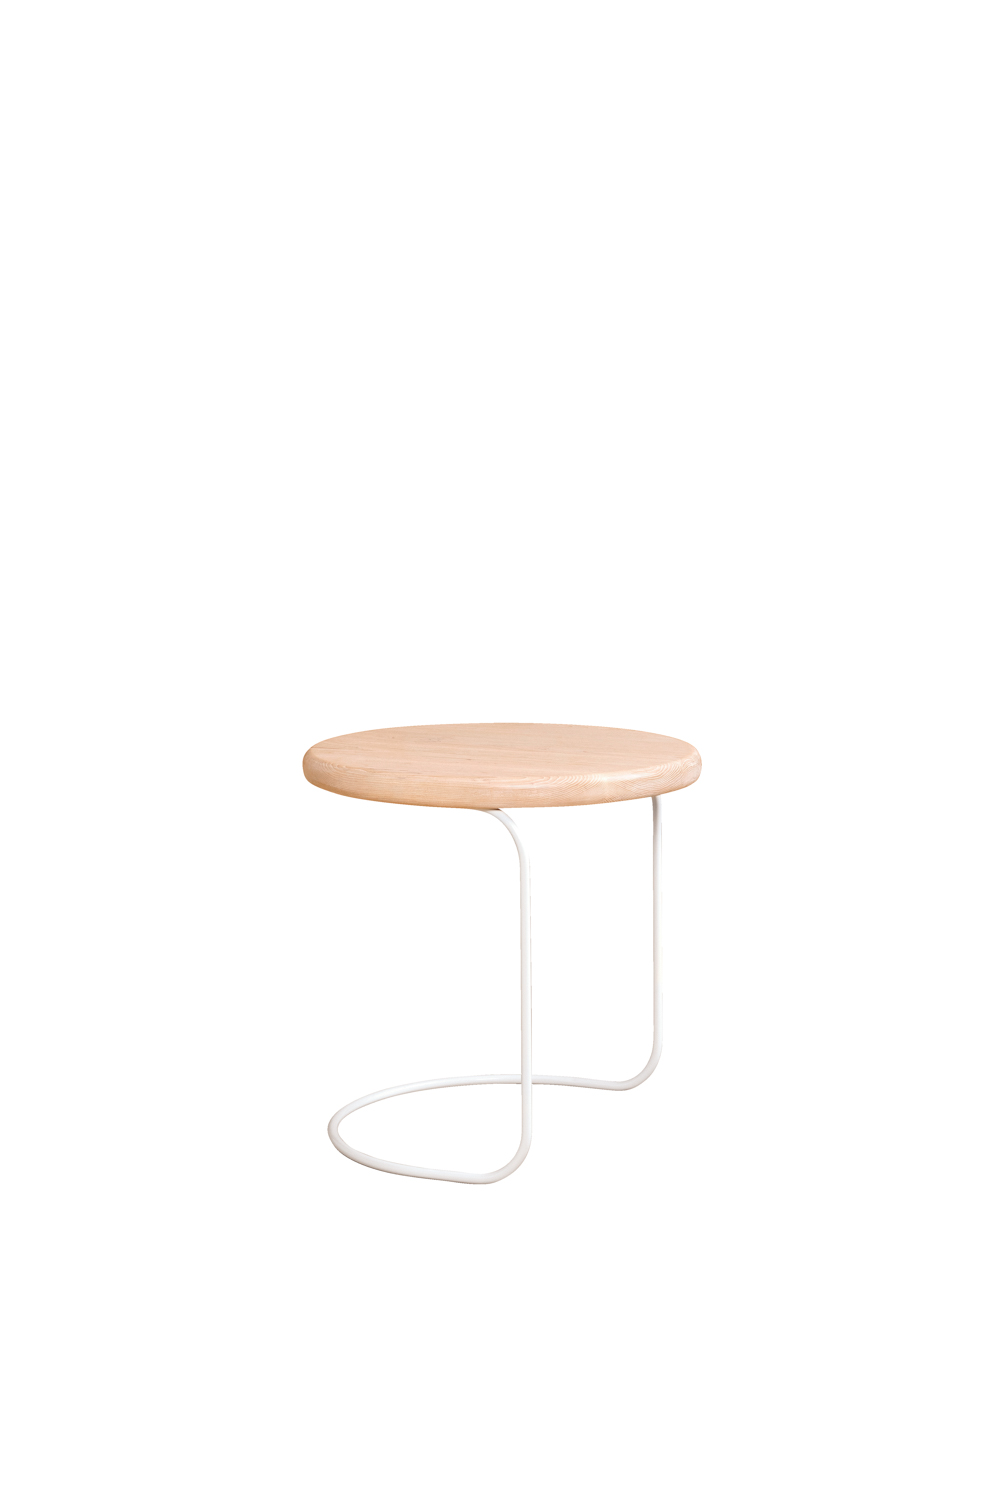 occasional tables with natural material and soft form by Lauren Hackett